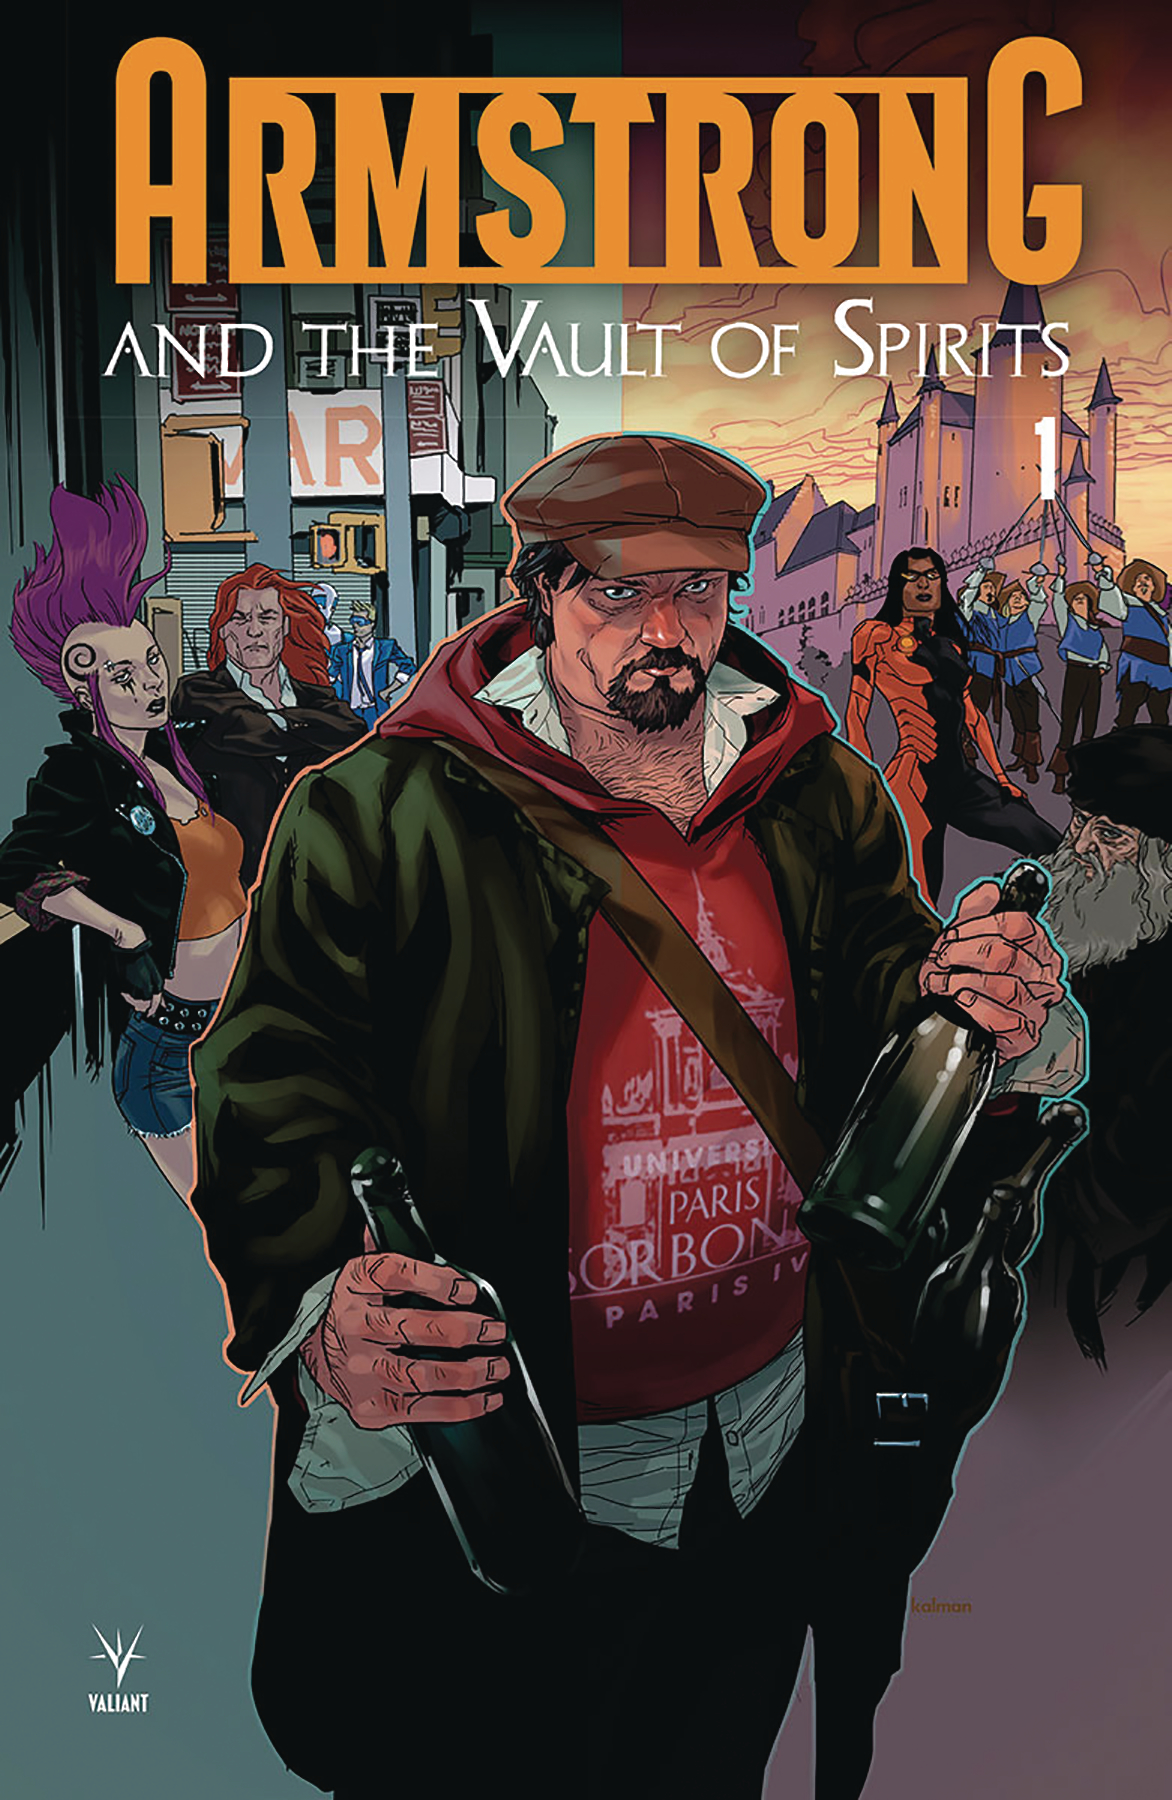 Armstrong and the Vault of Spirits no. 1 (2018 Series)